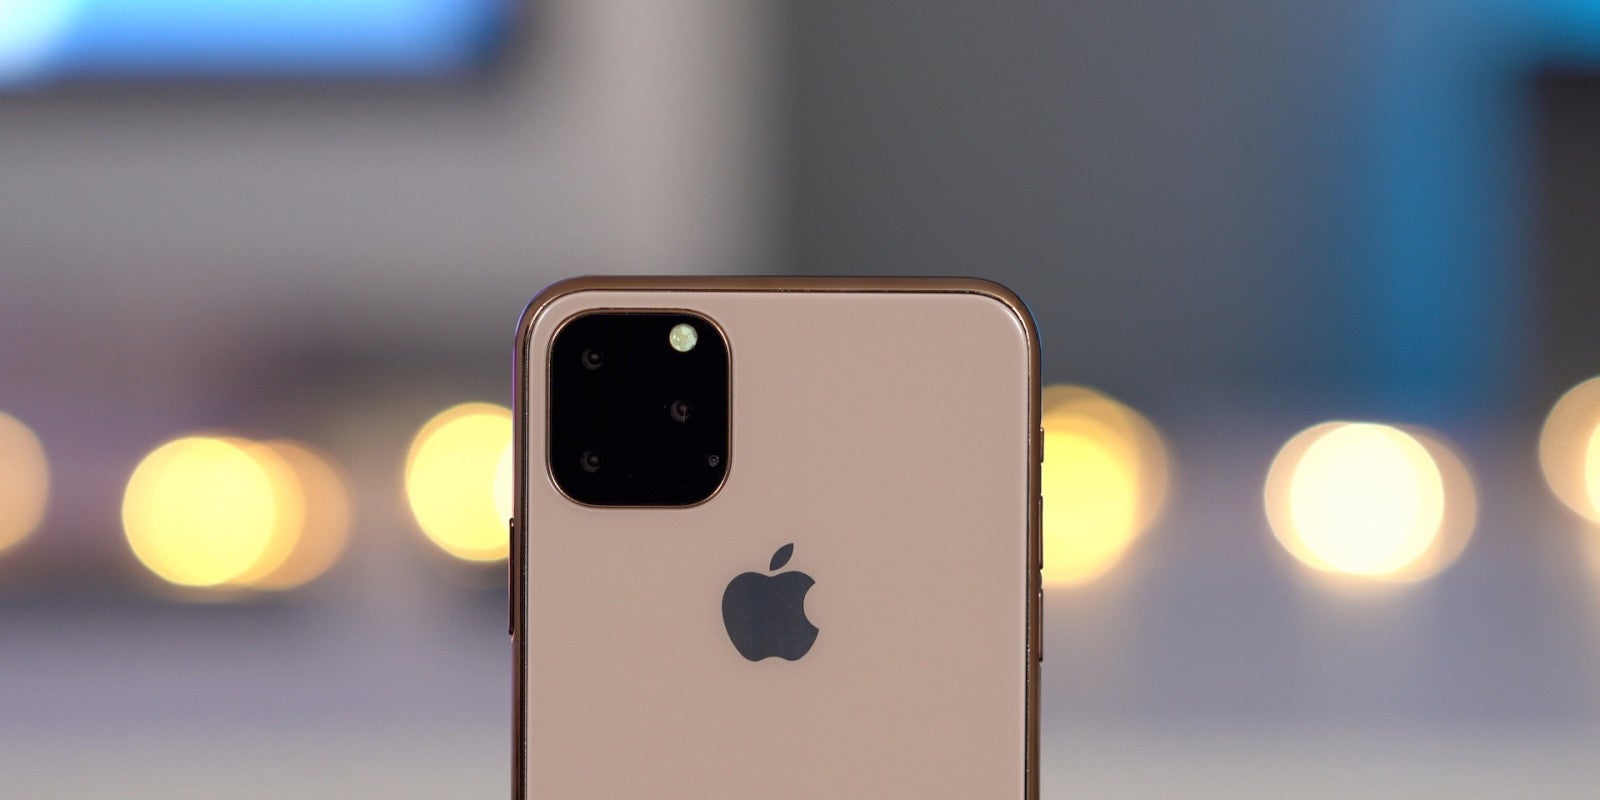 A good look at the controversial square camera module found on the back of this iPhone 11 dummy - These 2019 iPhone mockups might show us exactly what to expect from Apple in two months